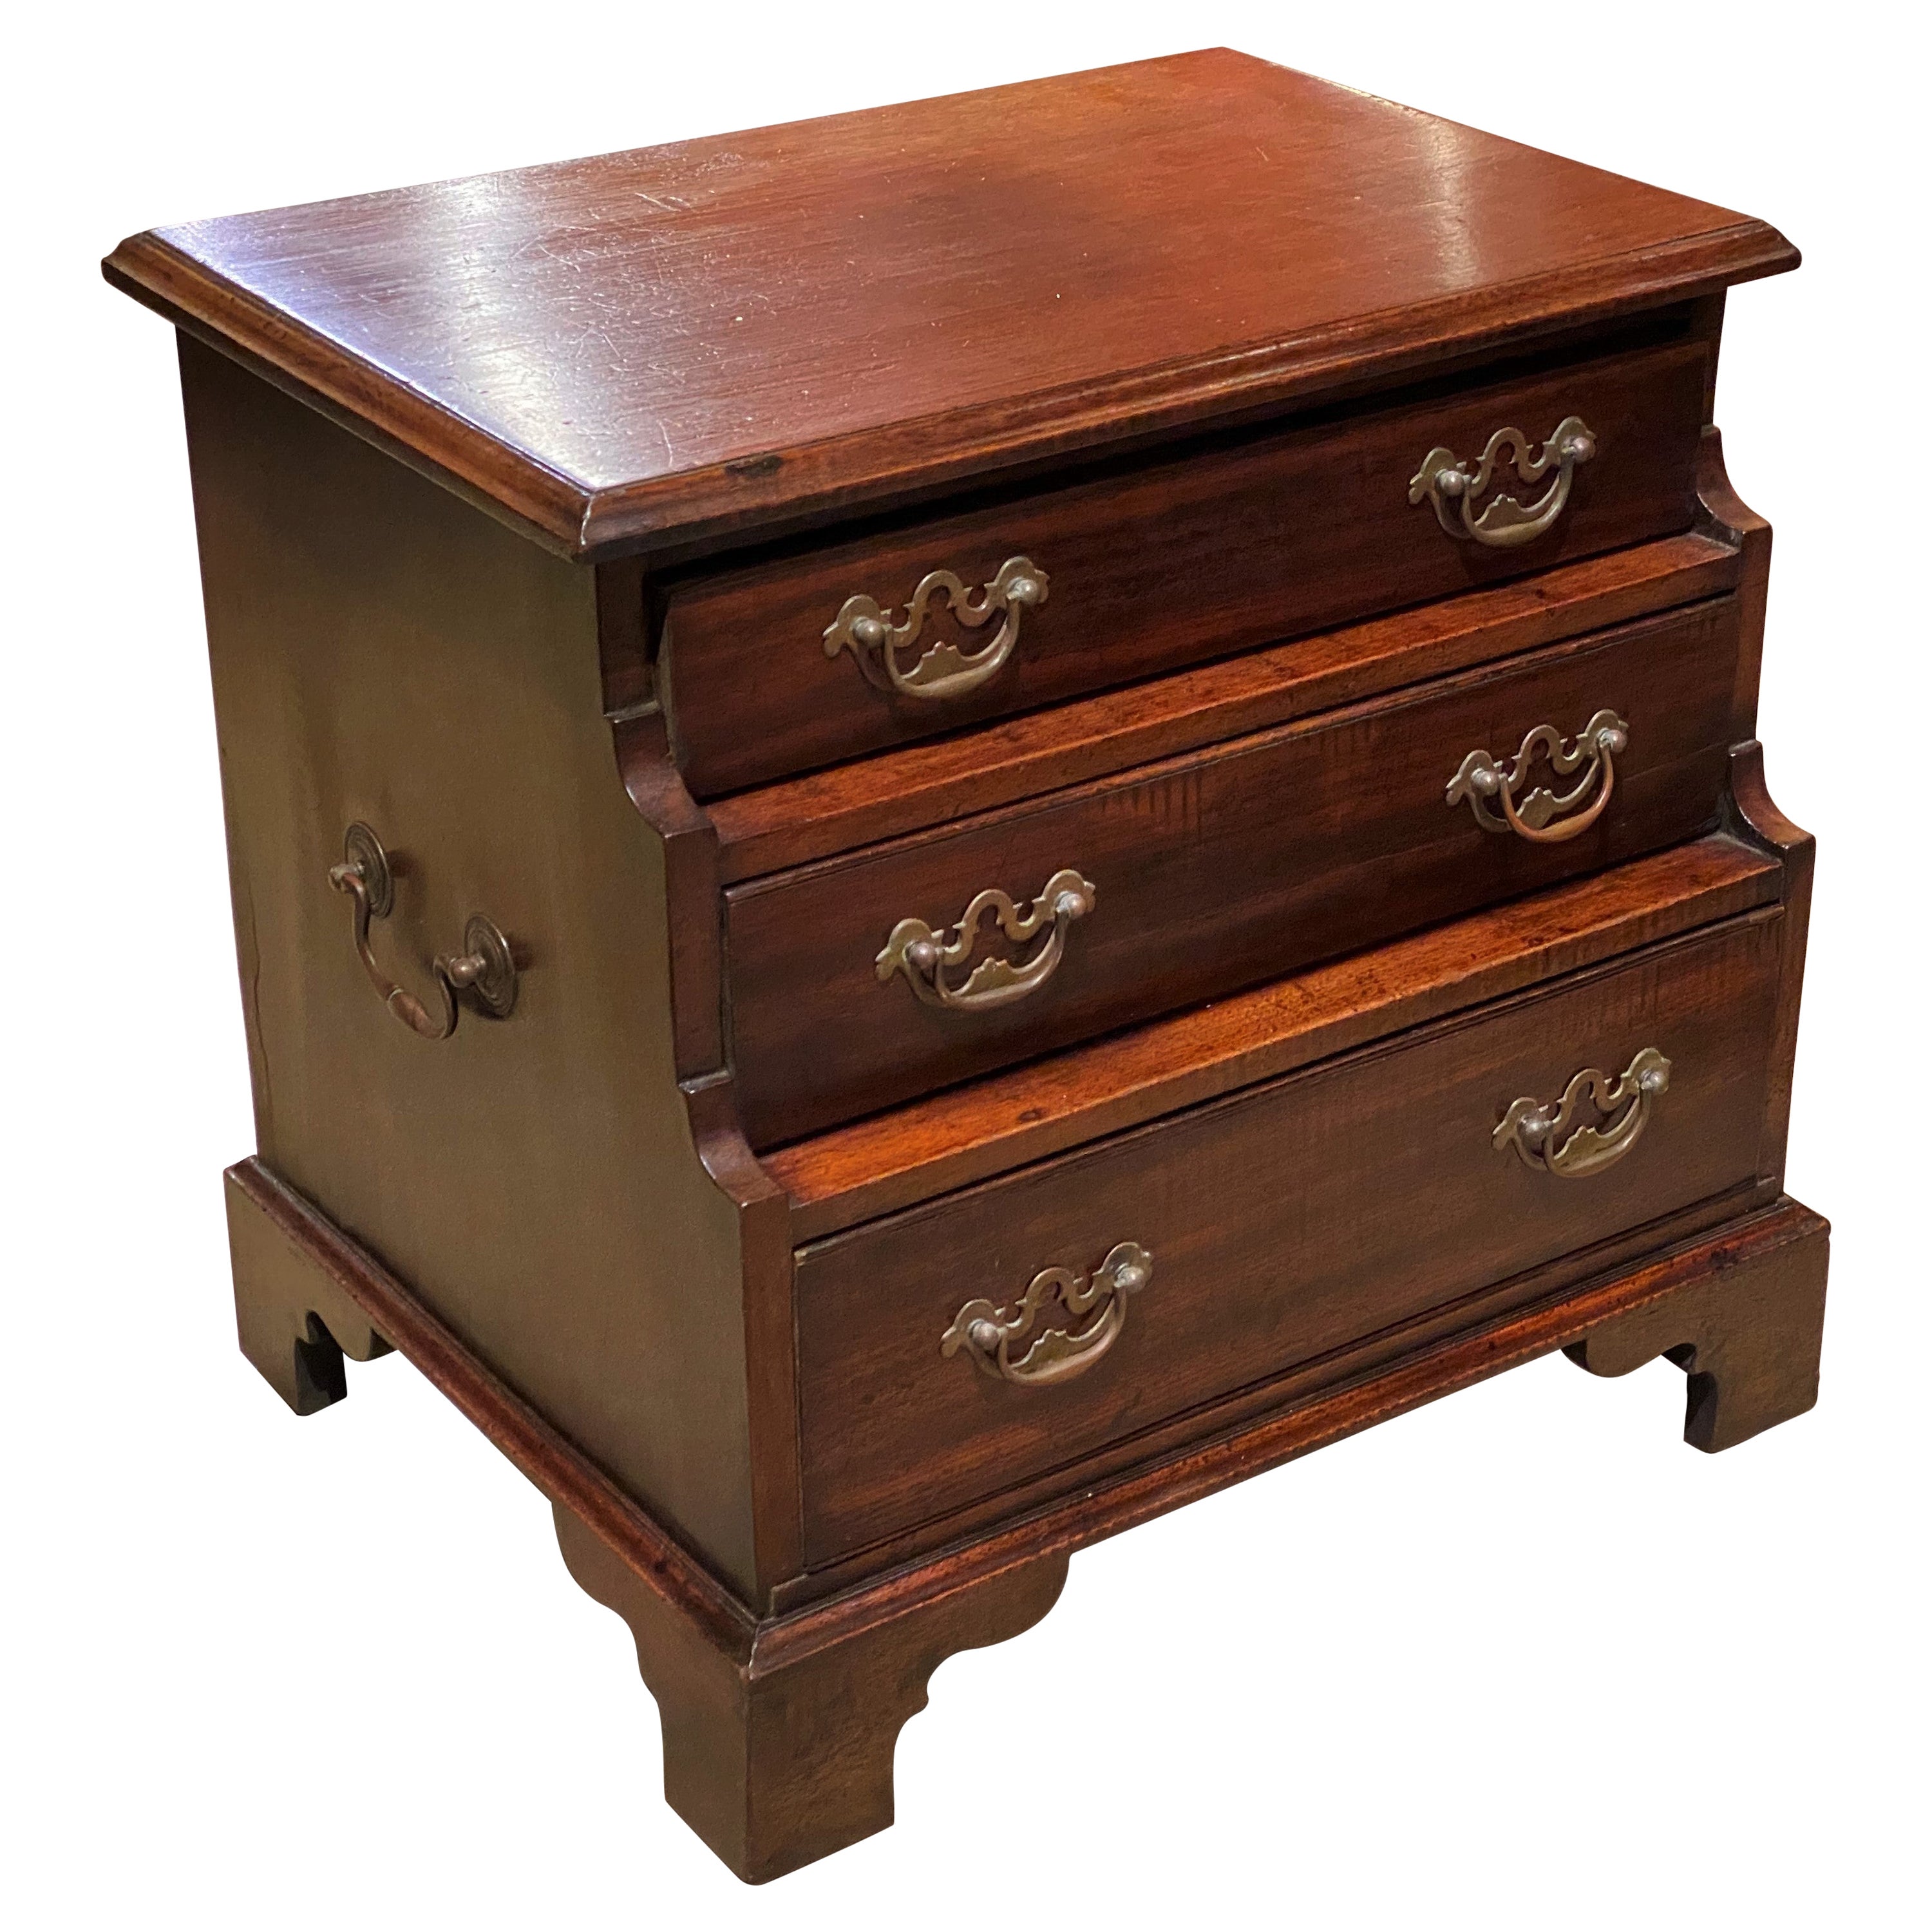 Diminutive English Chippendale Style Mahogany Three Drawer Chest or Side Table